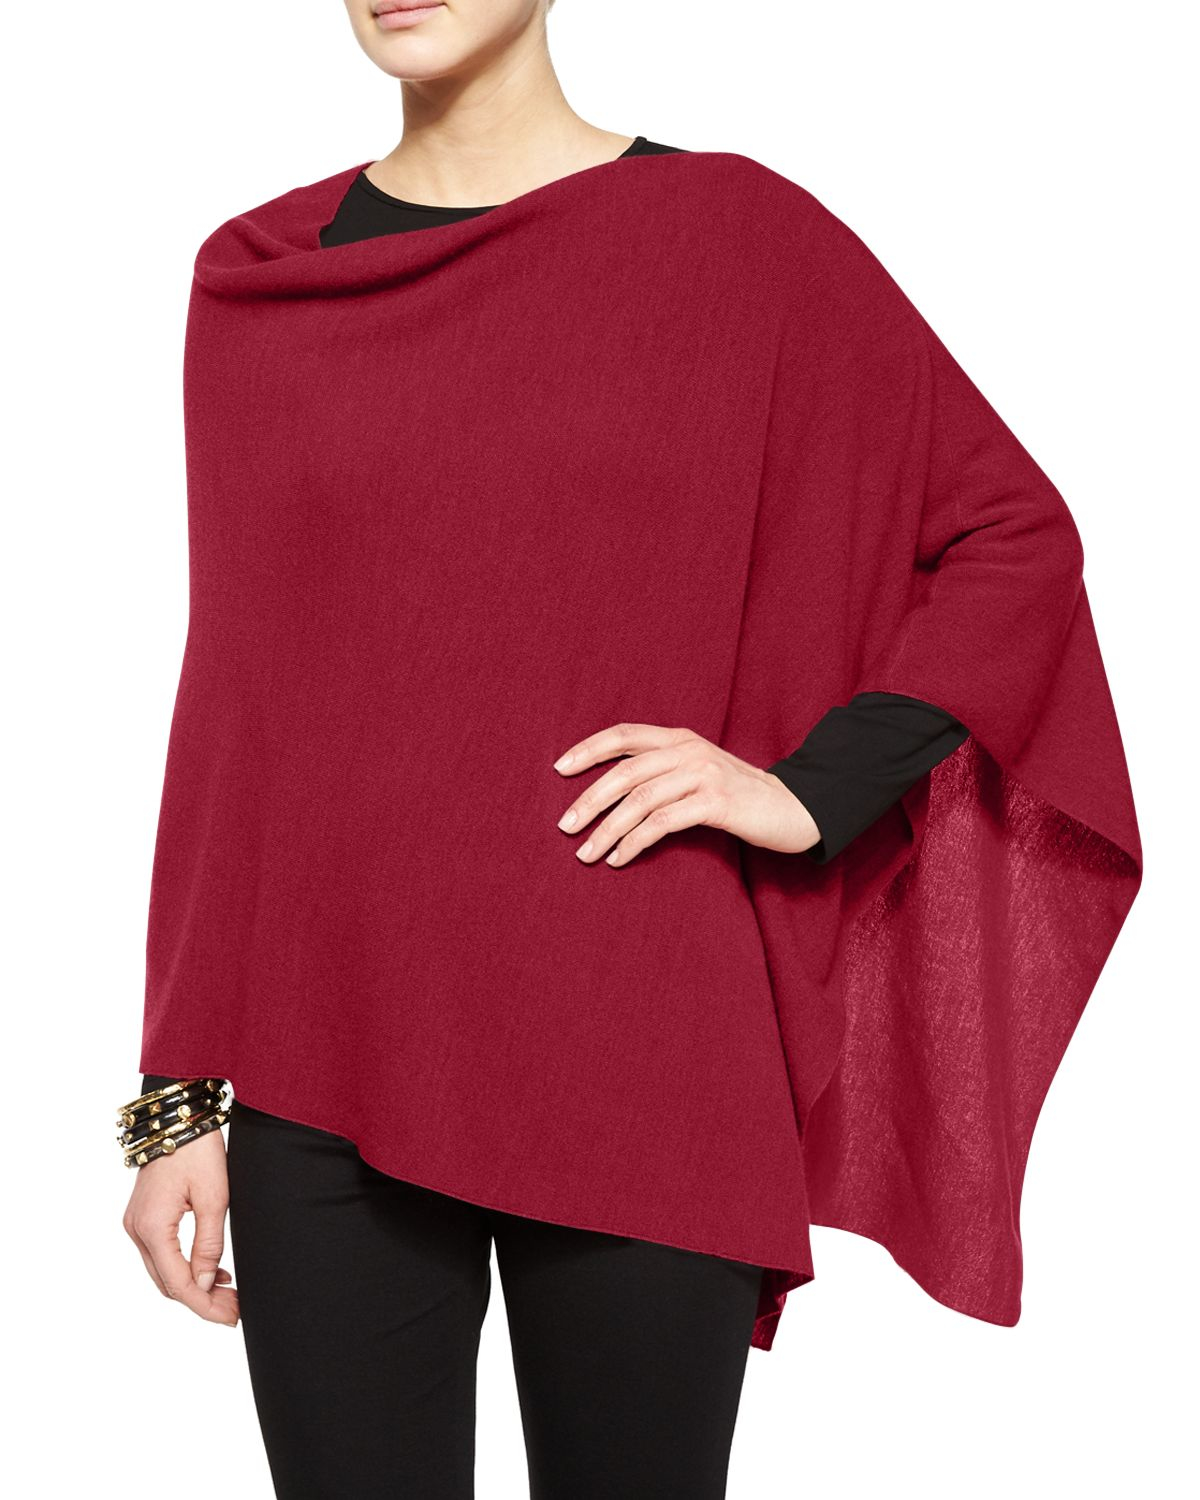 Lyst - Eileen Fisher Merino Wool Links Poncho in Red